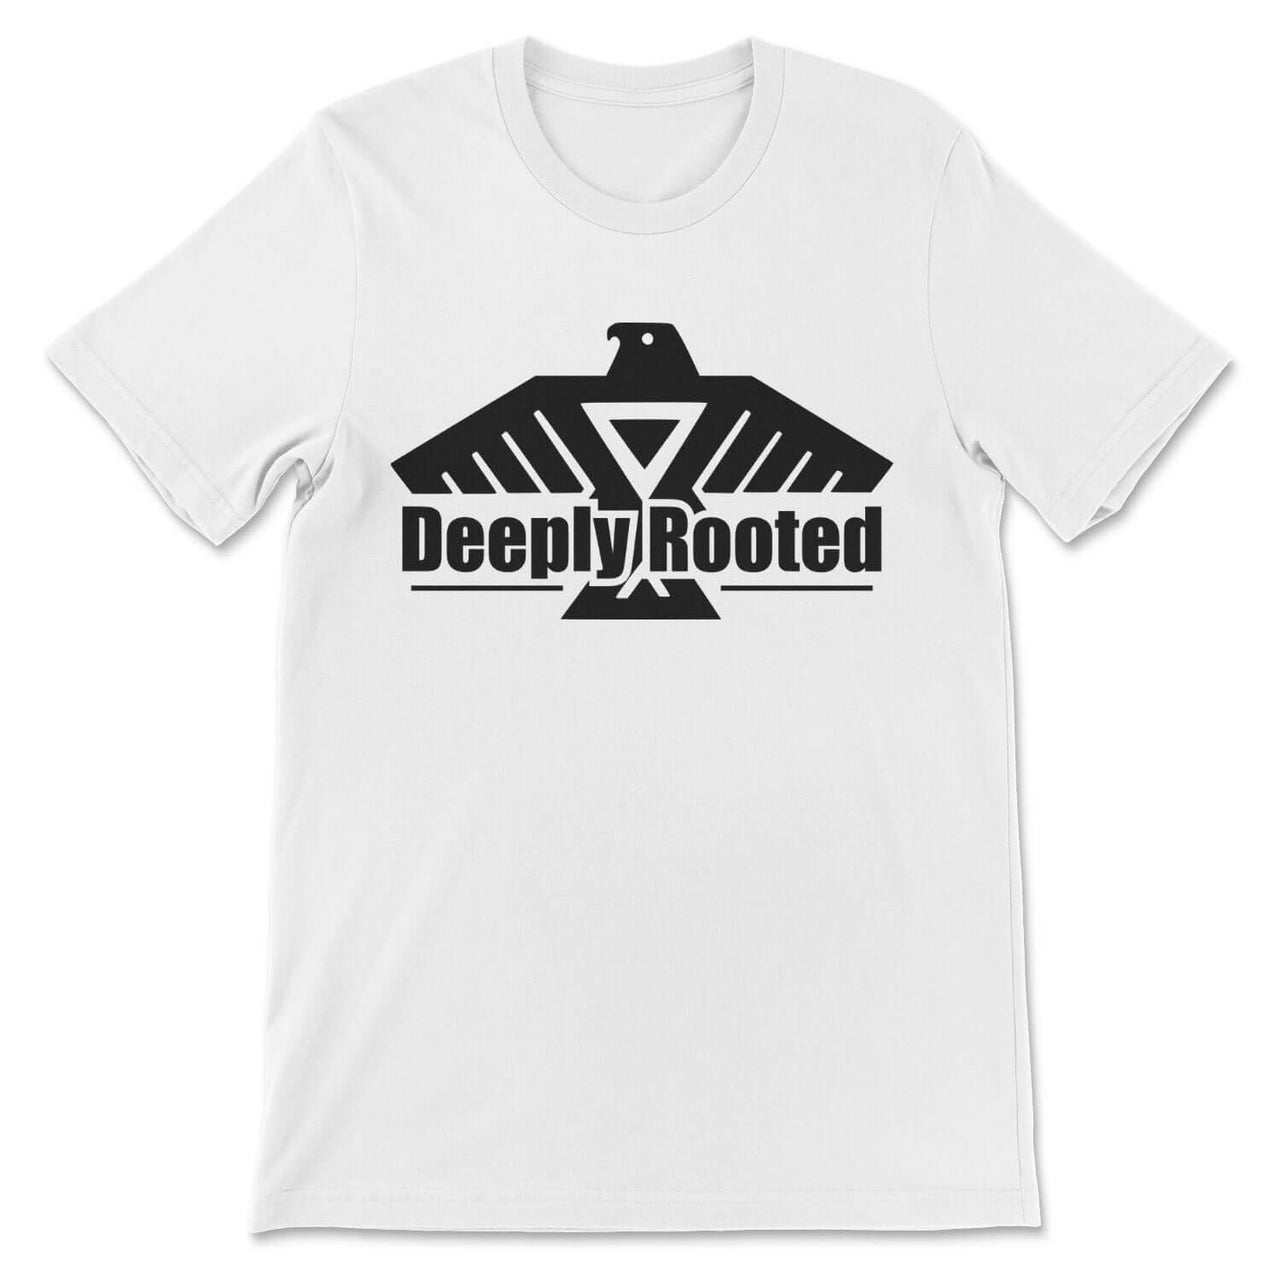 Deeply Rooted Tee